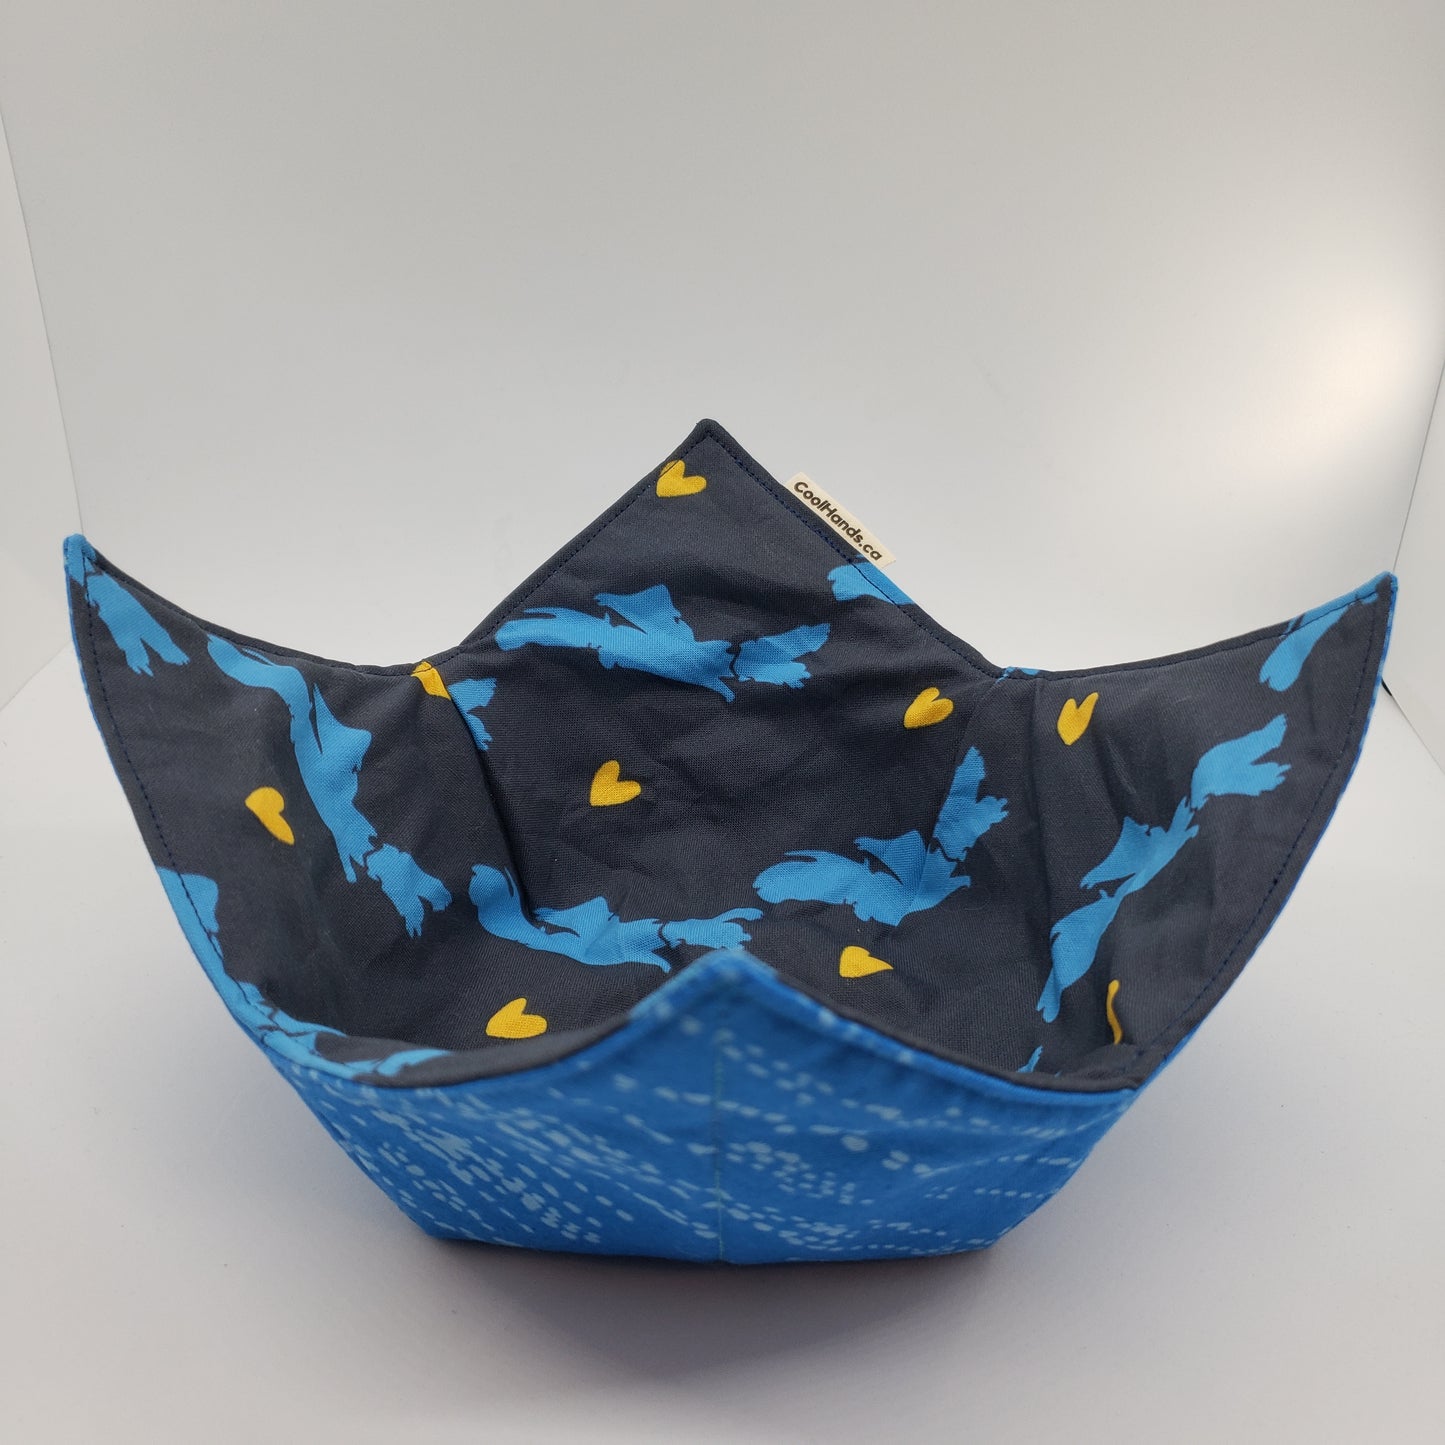 100% Cotton Microwavable Bowl Cozy - "Blue Nose, Yellow Heart